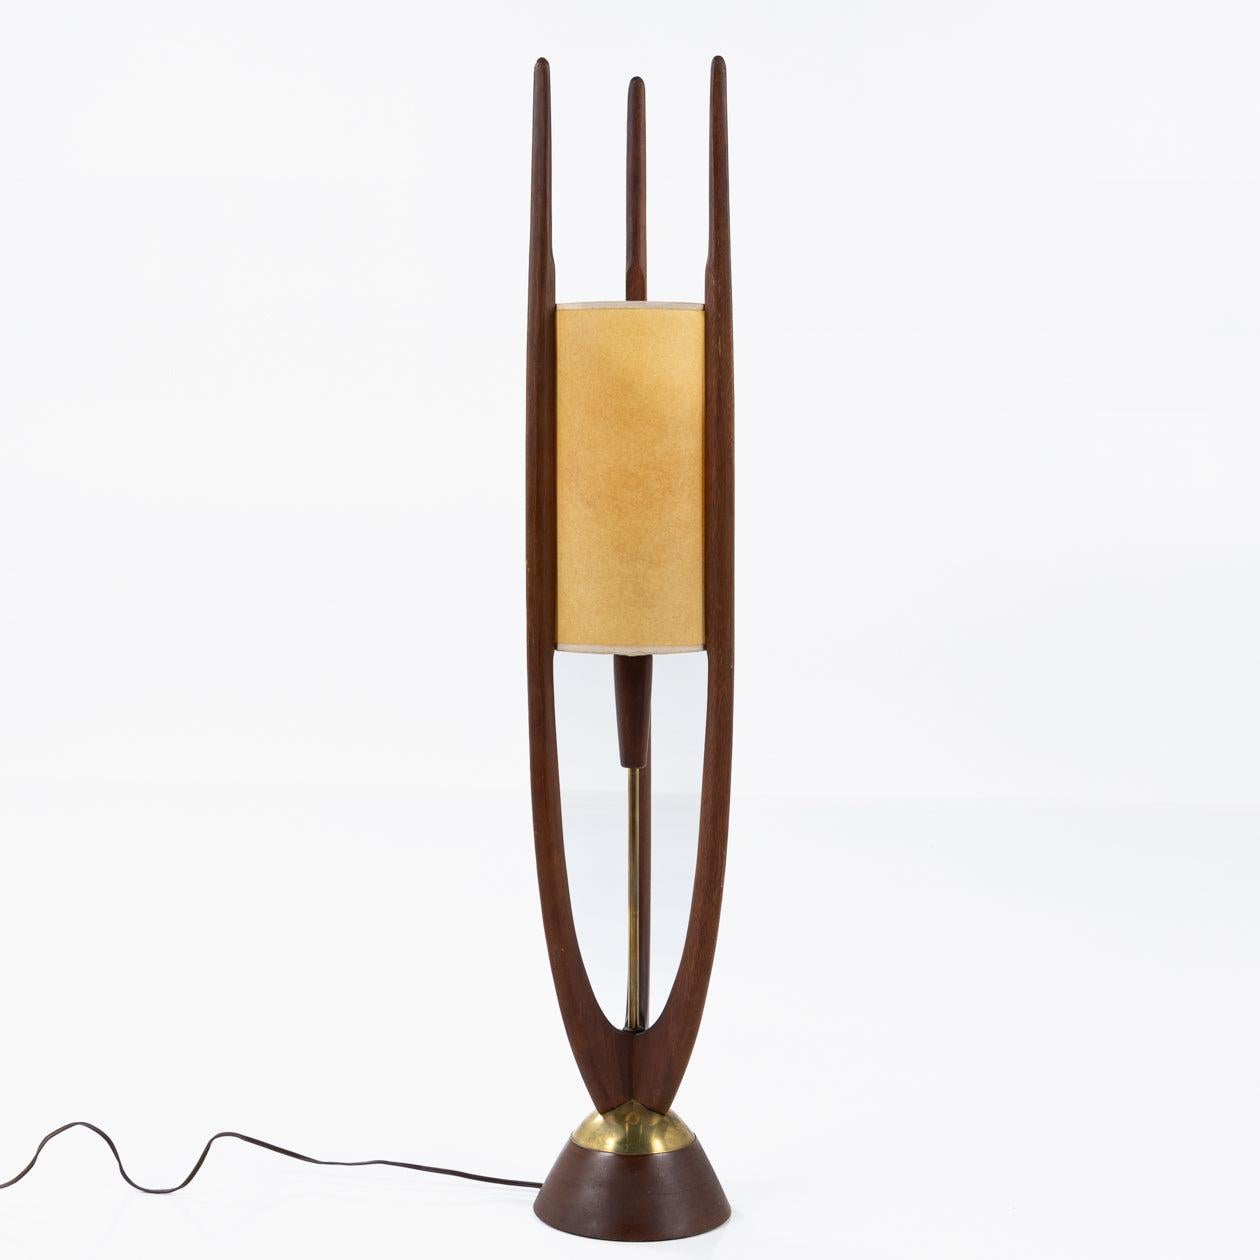 A pair of floor lamps in walnut and brass.
Manufactered by Modeline.